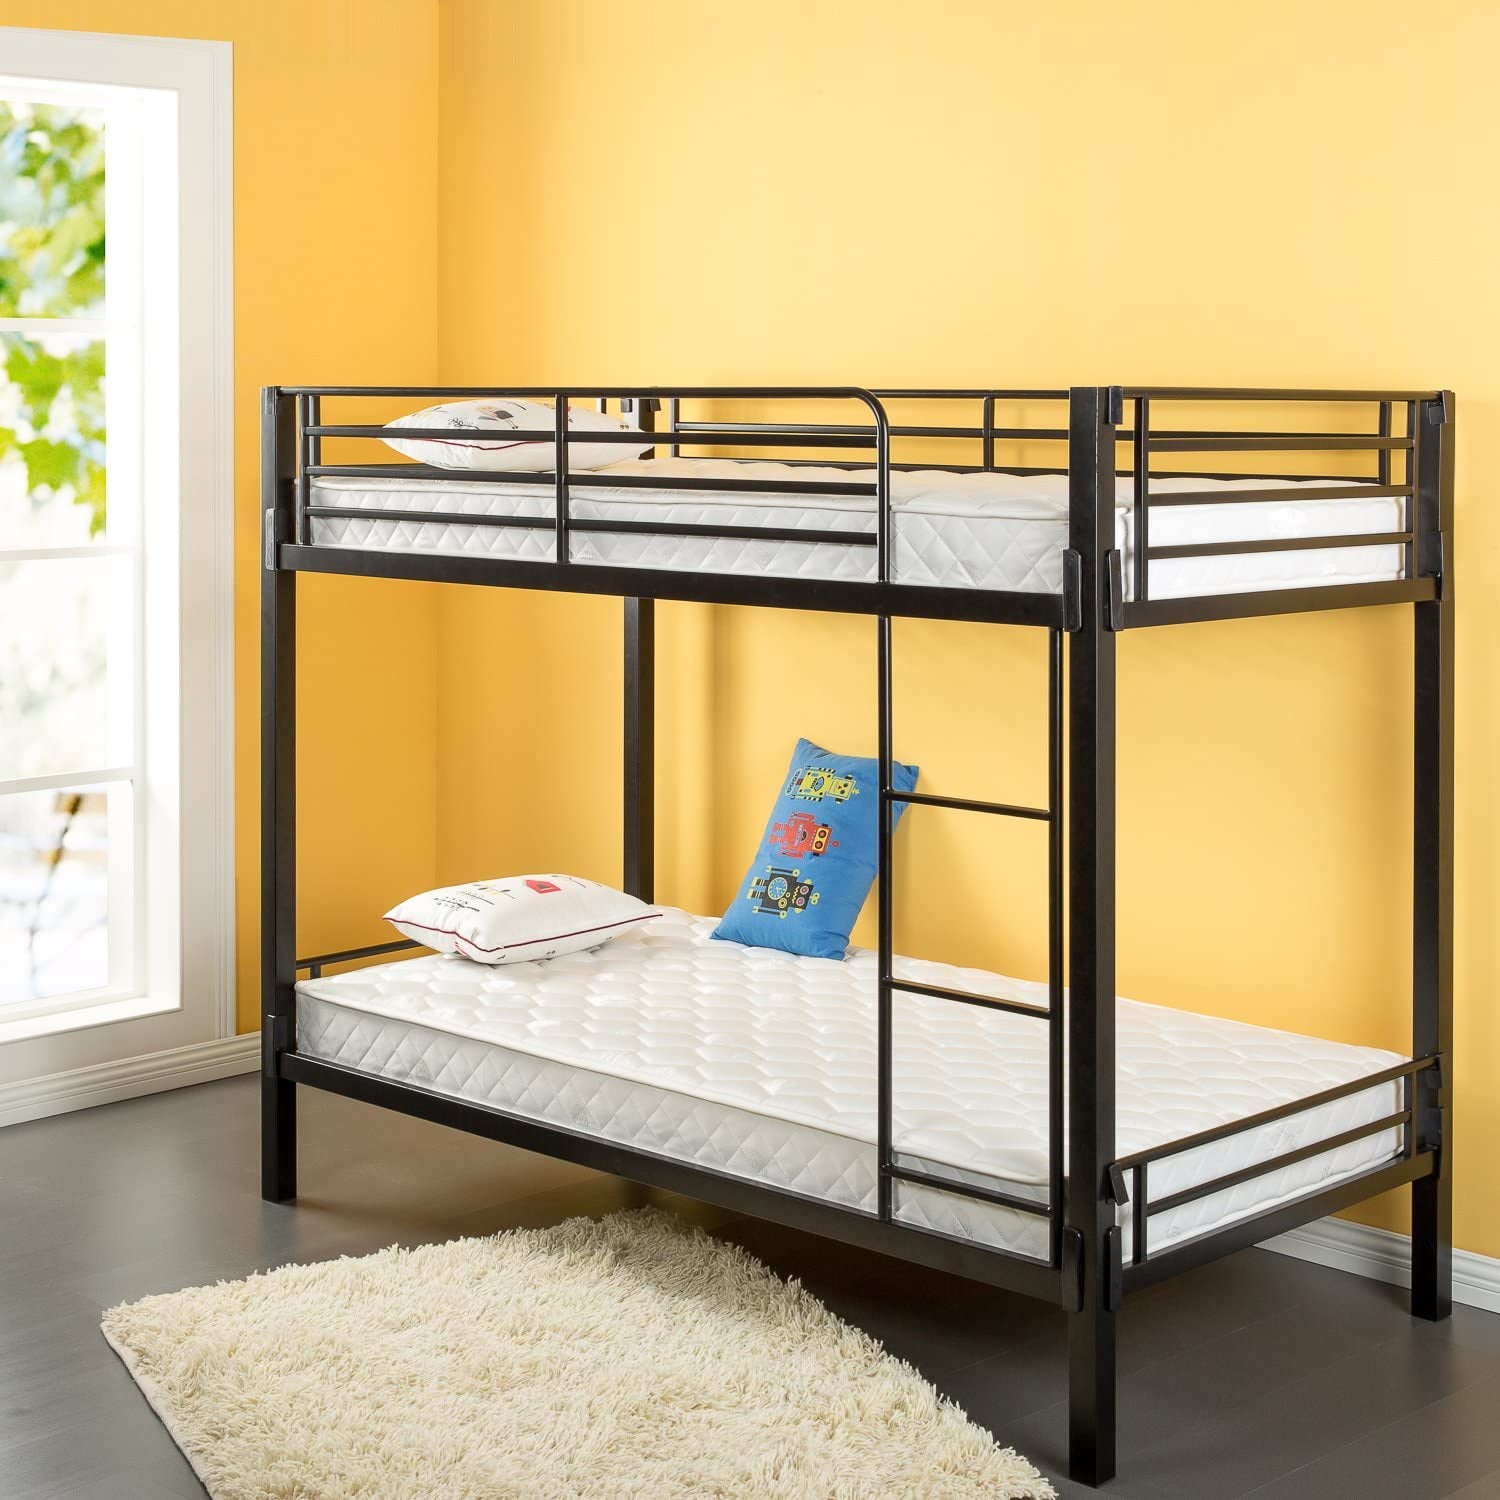 Kids 6 inch Twin Size Bunk Bed Spring Mattresses Extra Firm Comfort Level